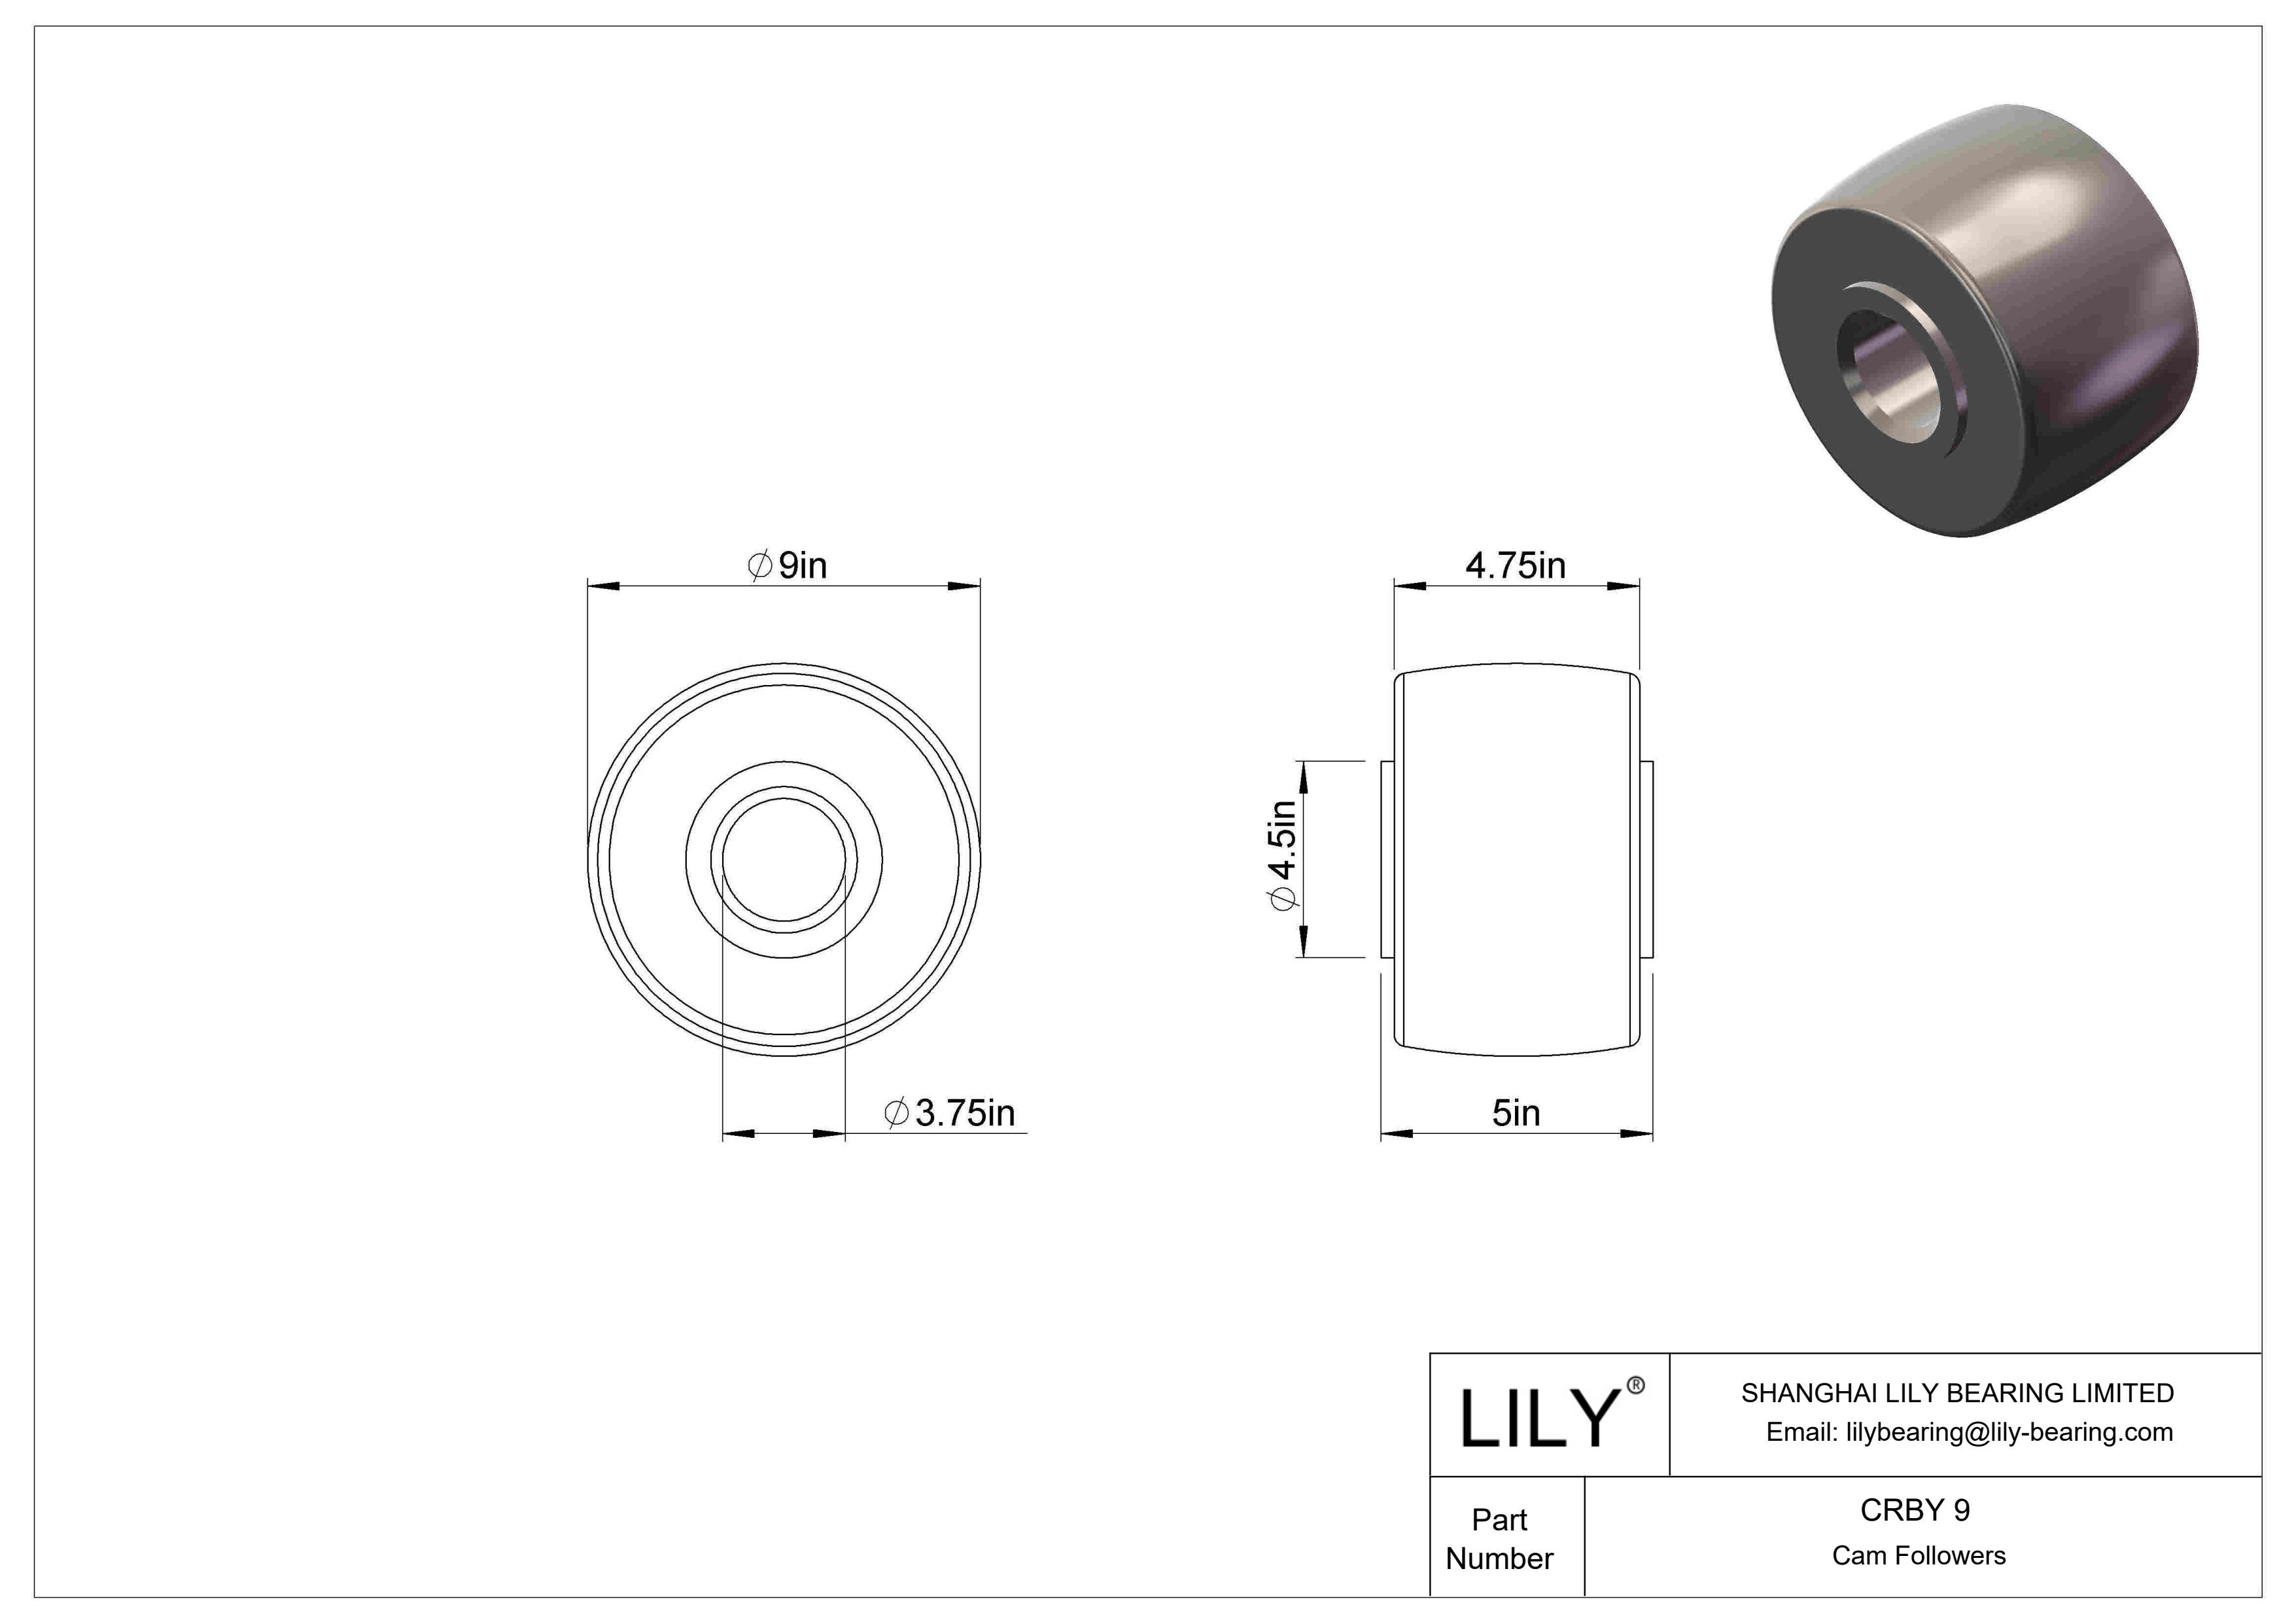 CRBY 9 Roller Cam Follower-Yoke Type cad drawing